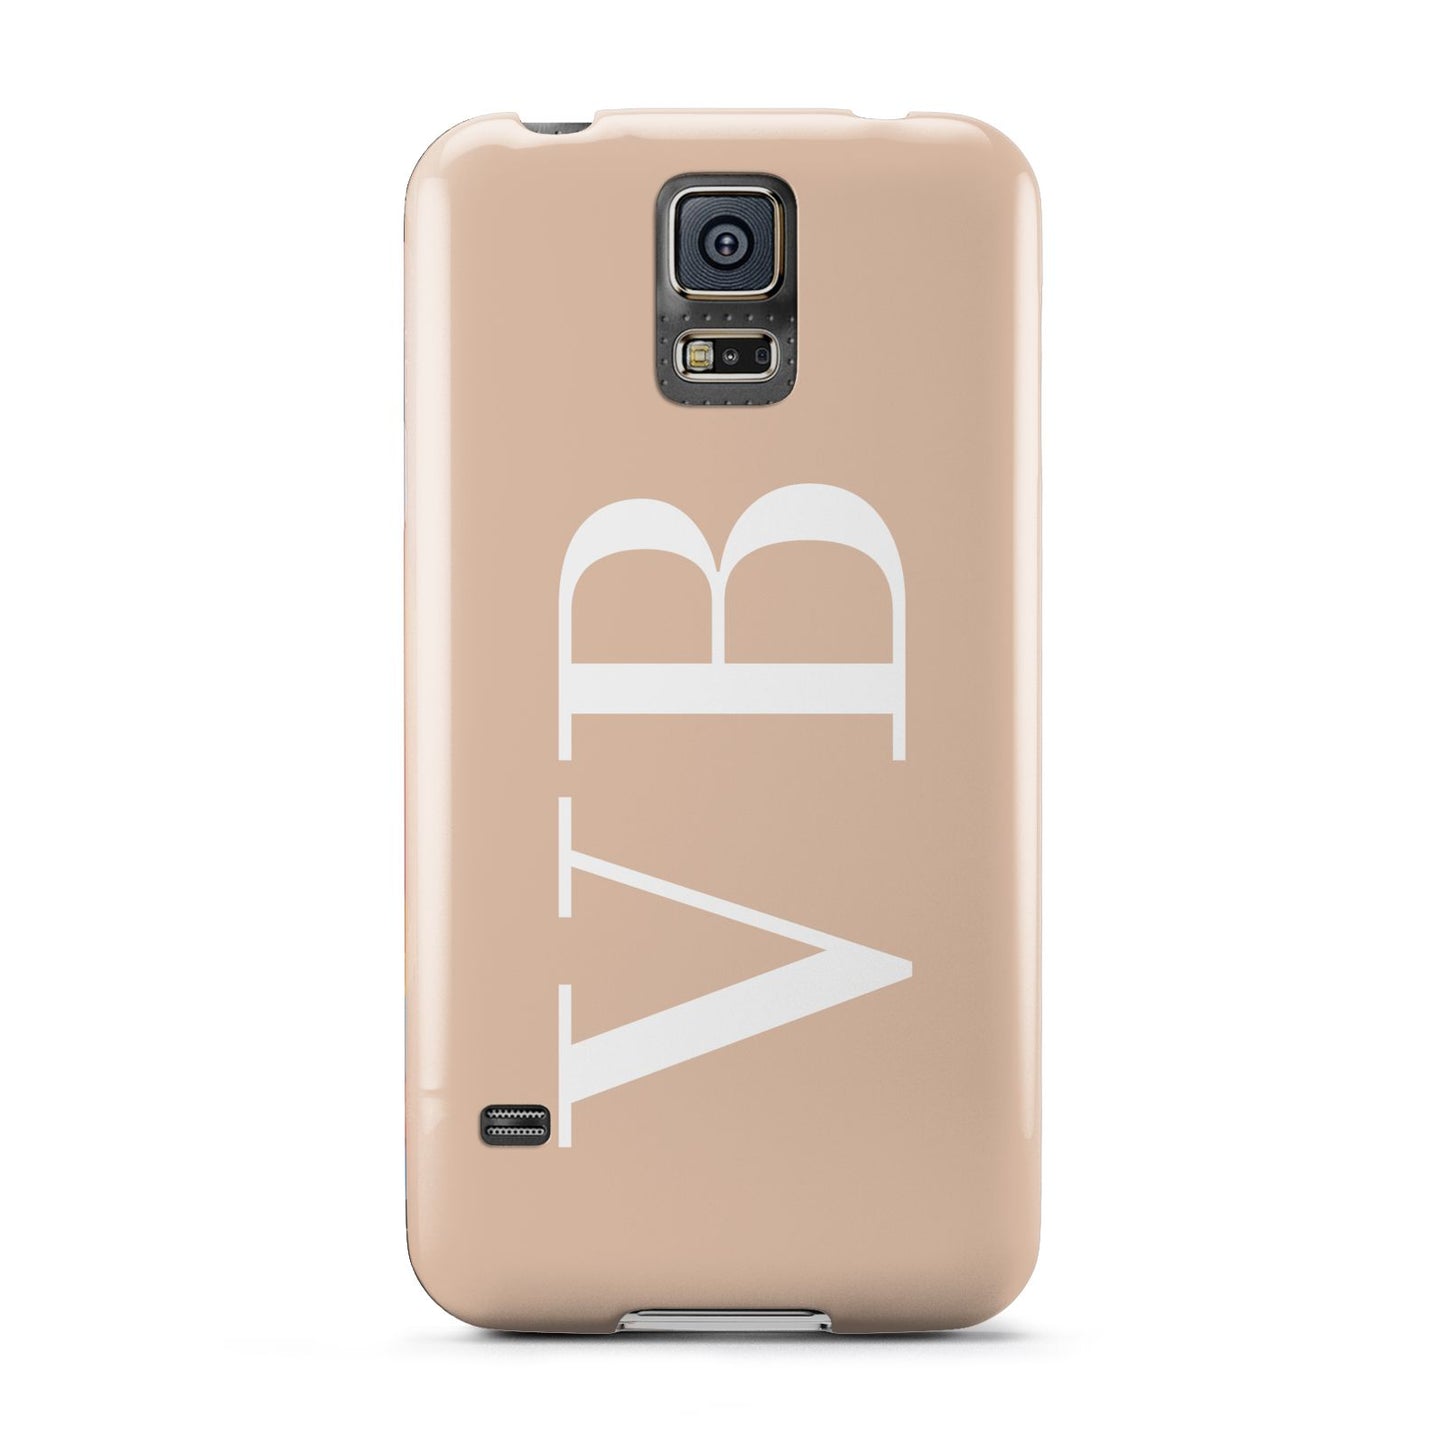 Nude And White Personalised Samsung Galaxy S5 Case